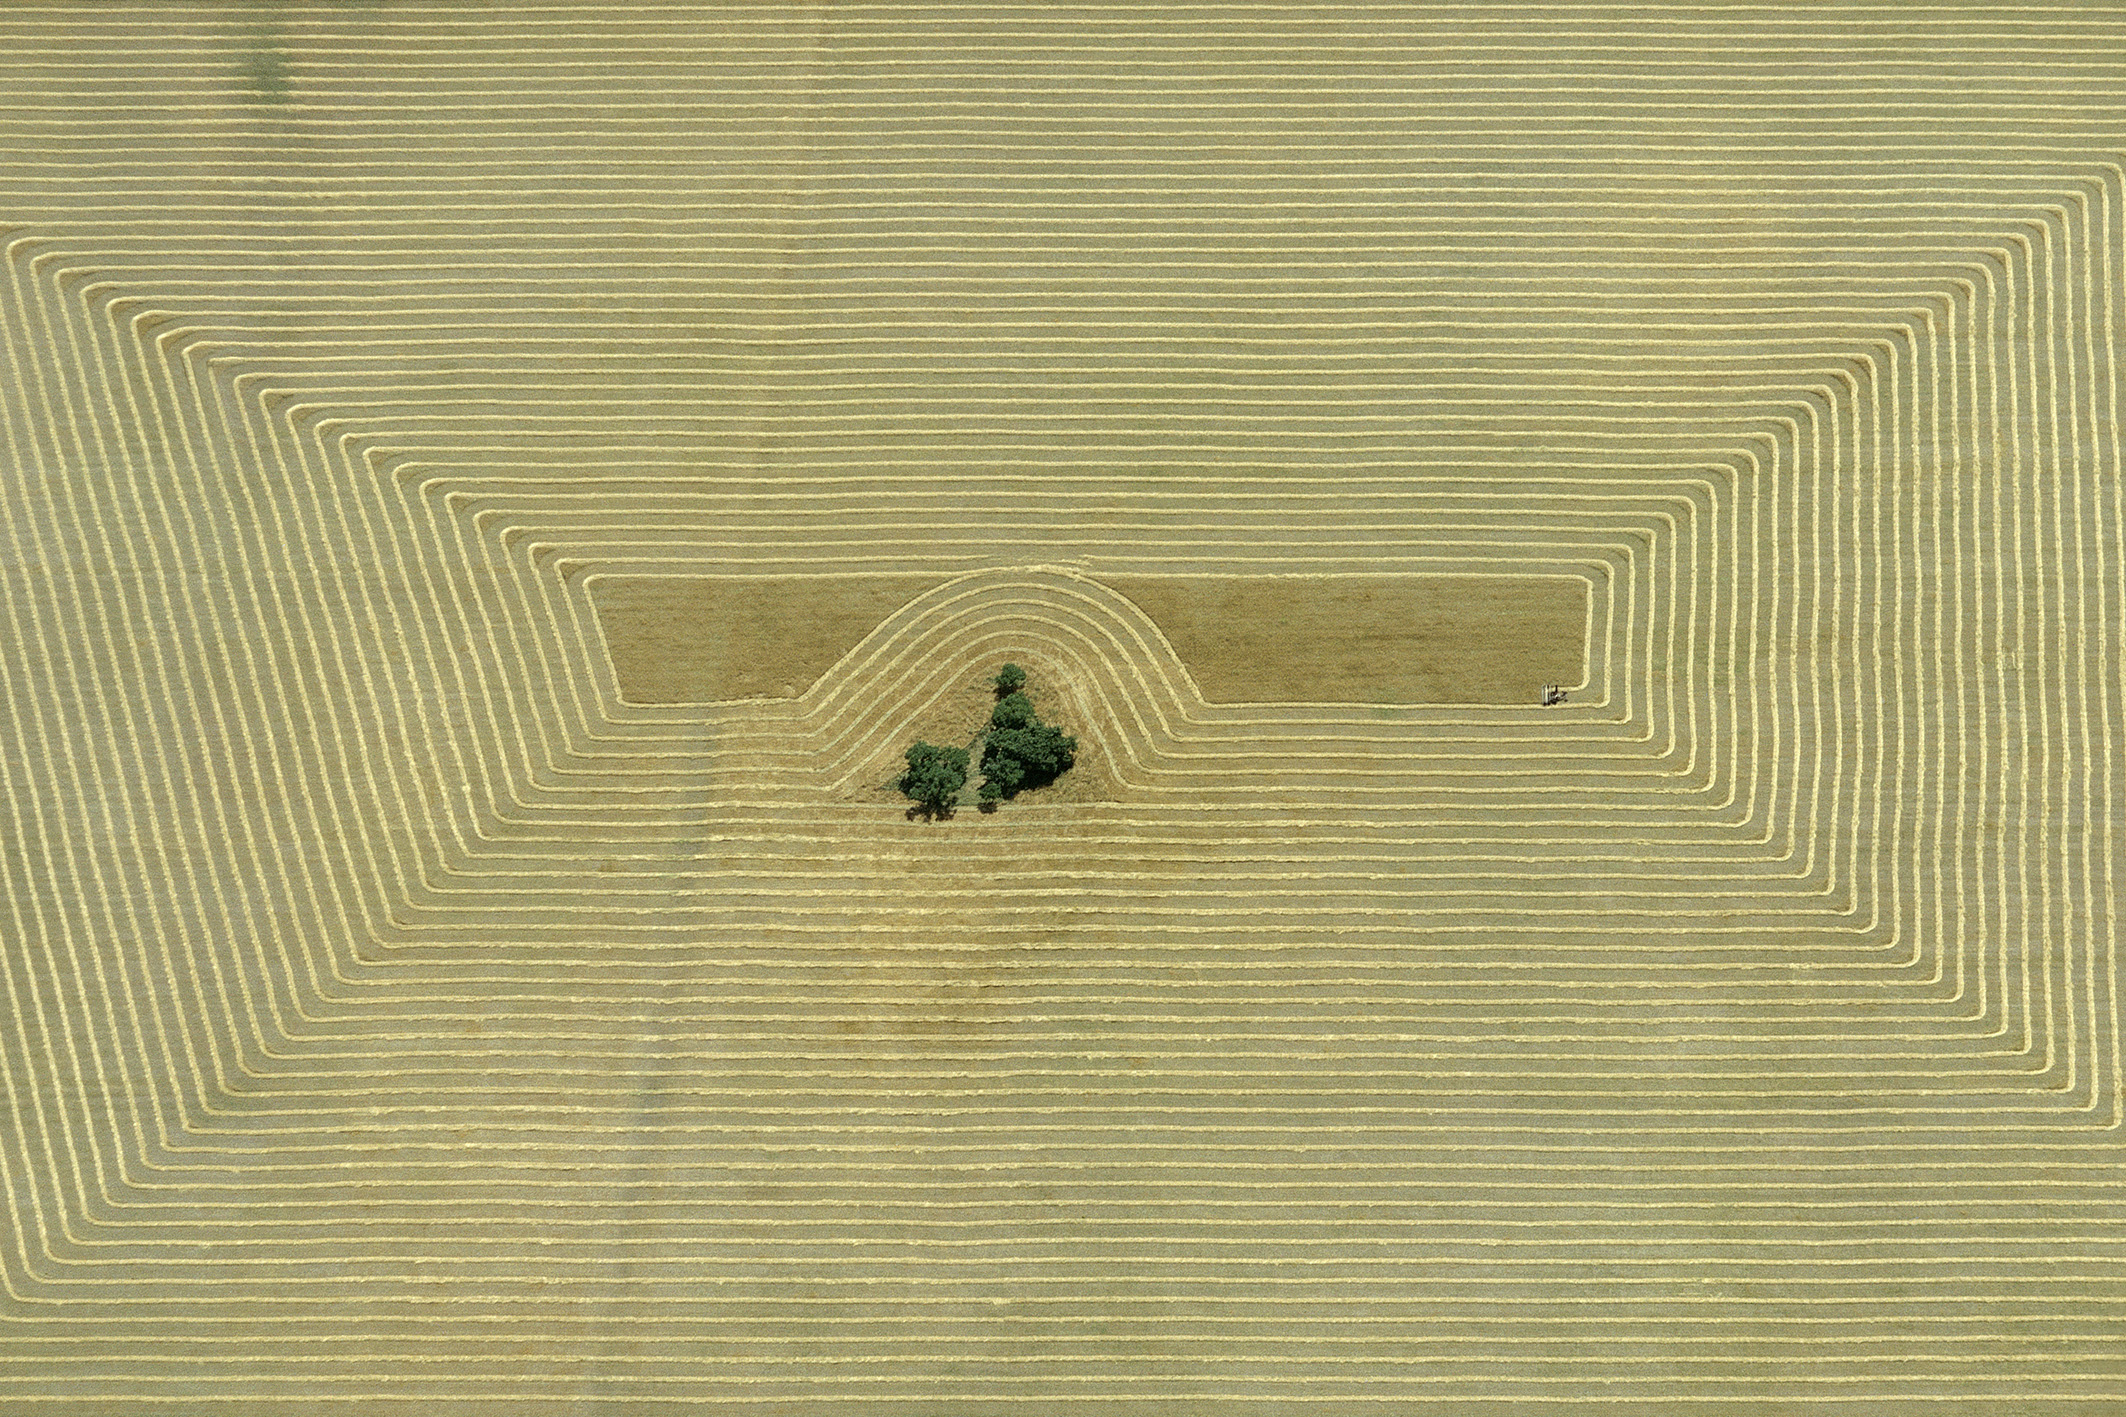 Georg Gerster, Harvest pattern, Argentina, 1967
Inkjet printed with pigmented Epson Ultra Chrome K3, on Epson Exhibition Fiber Paper
100 x 150 cm
Edition of 8 + 2 AP